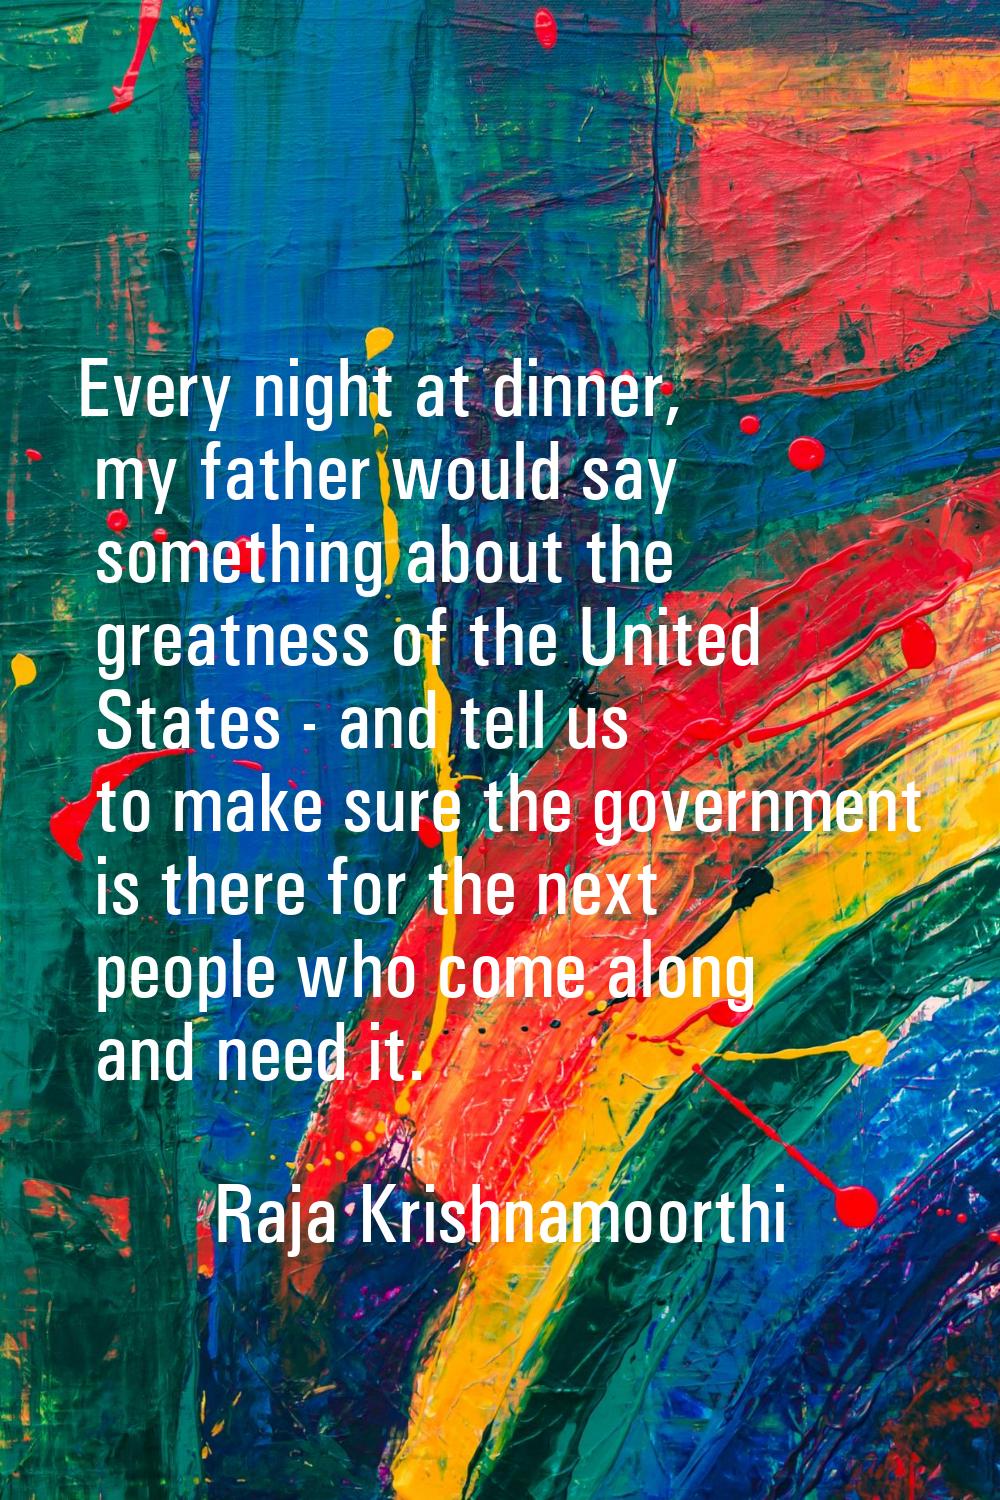 Every night at dinner, my father would say something about the greatness of the United States - and